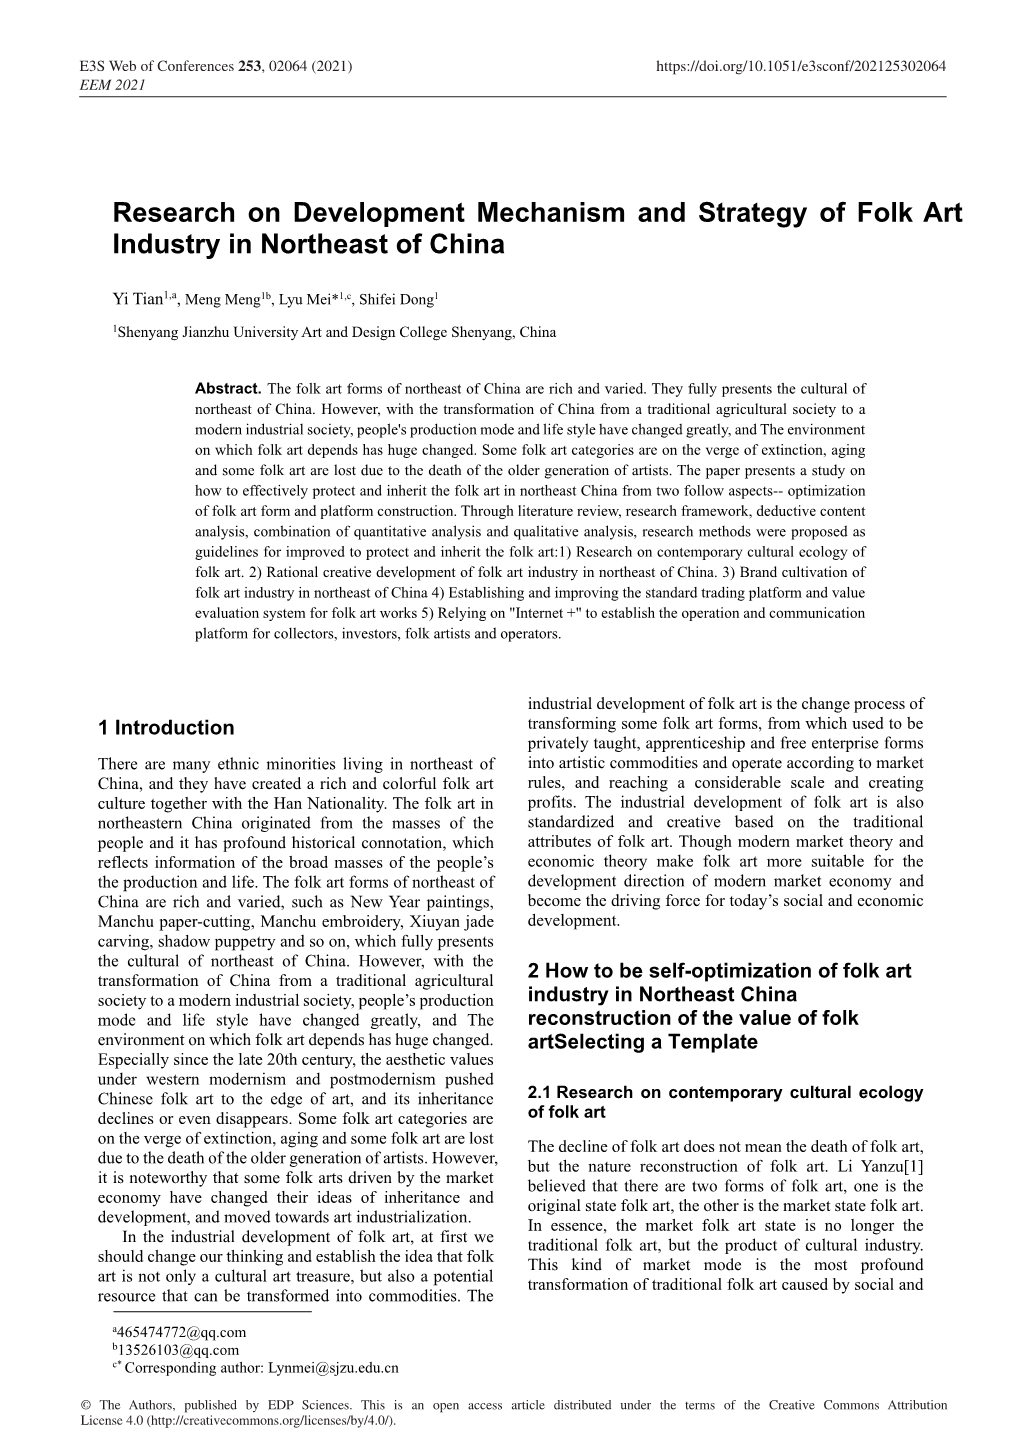 Research on Development Mechanism and Strategy of Folk Art Industry in Northeast of China